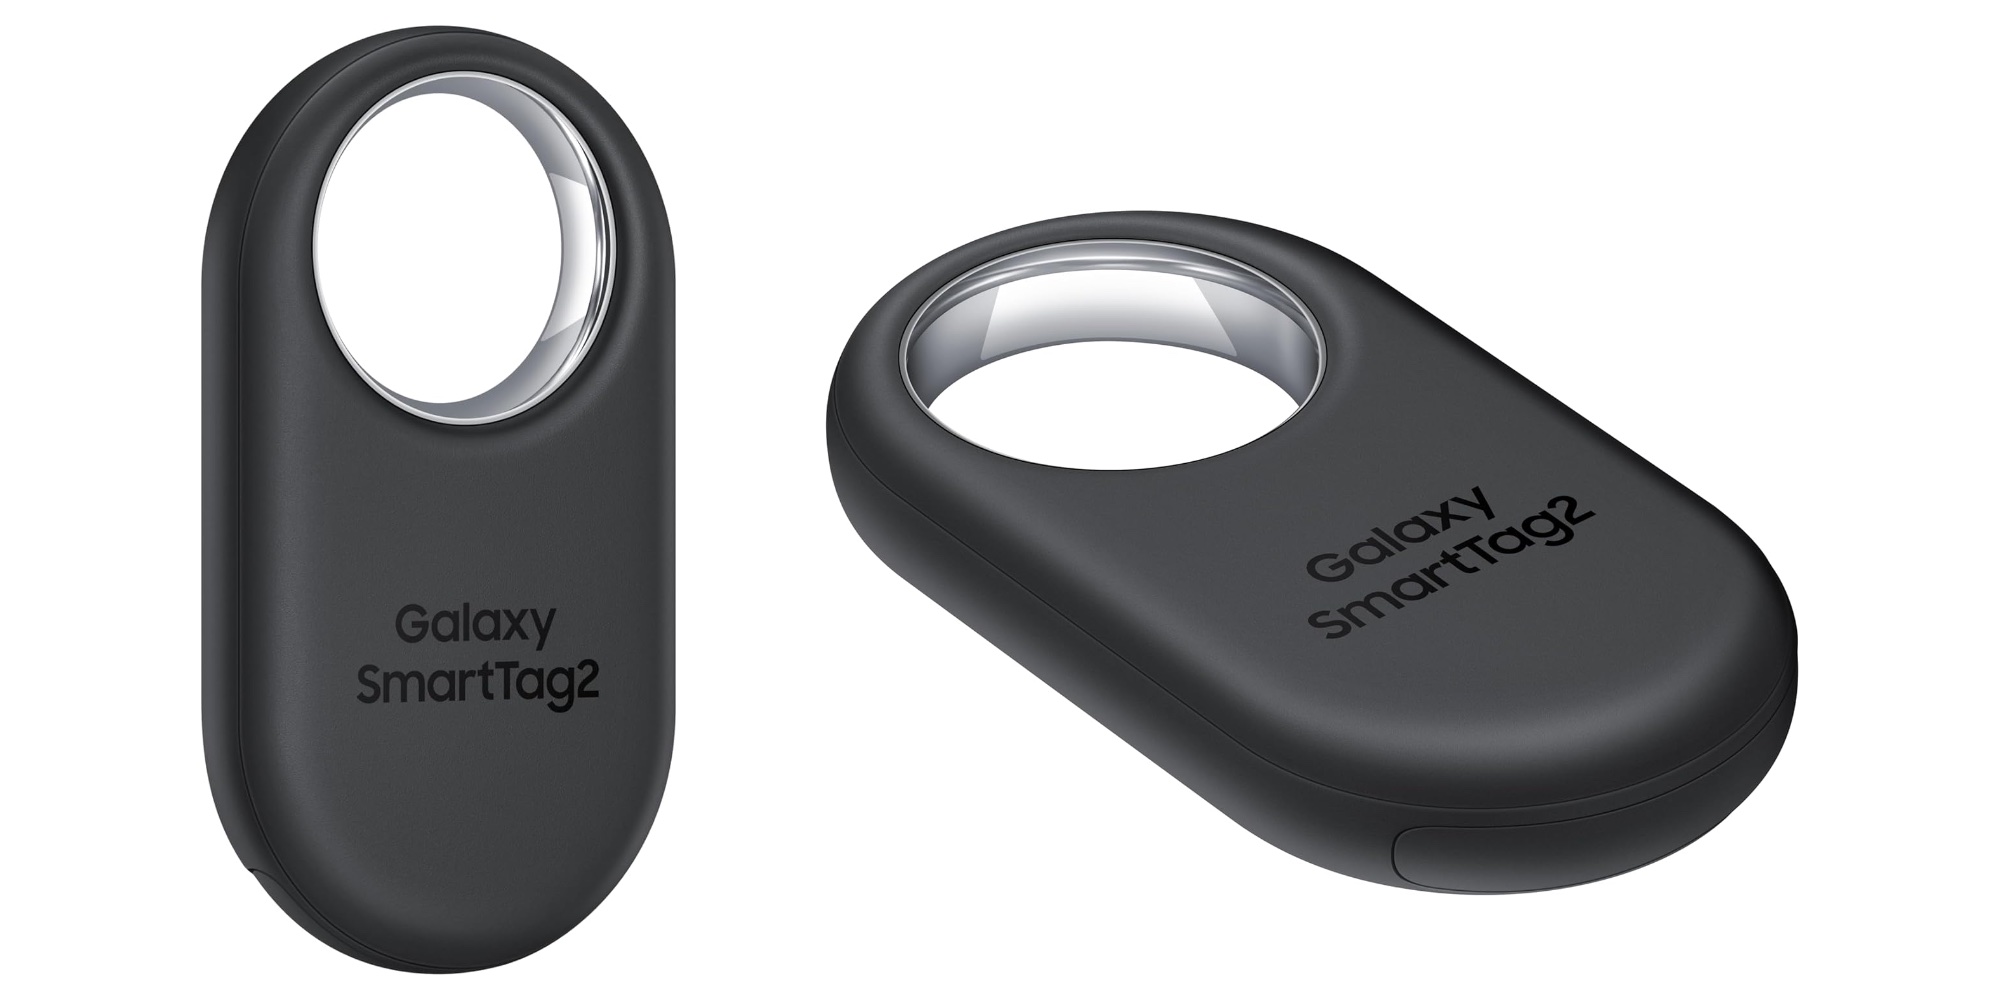 Samsung's just-released Galaxy SmartTag 2 sees first discount to